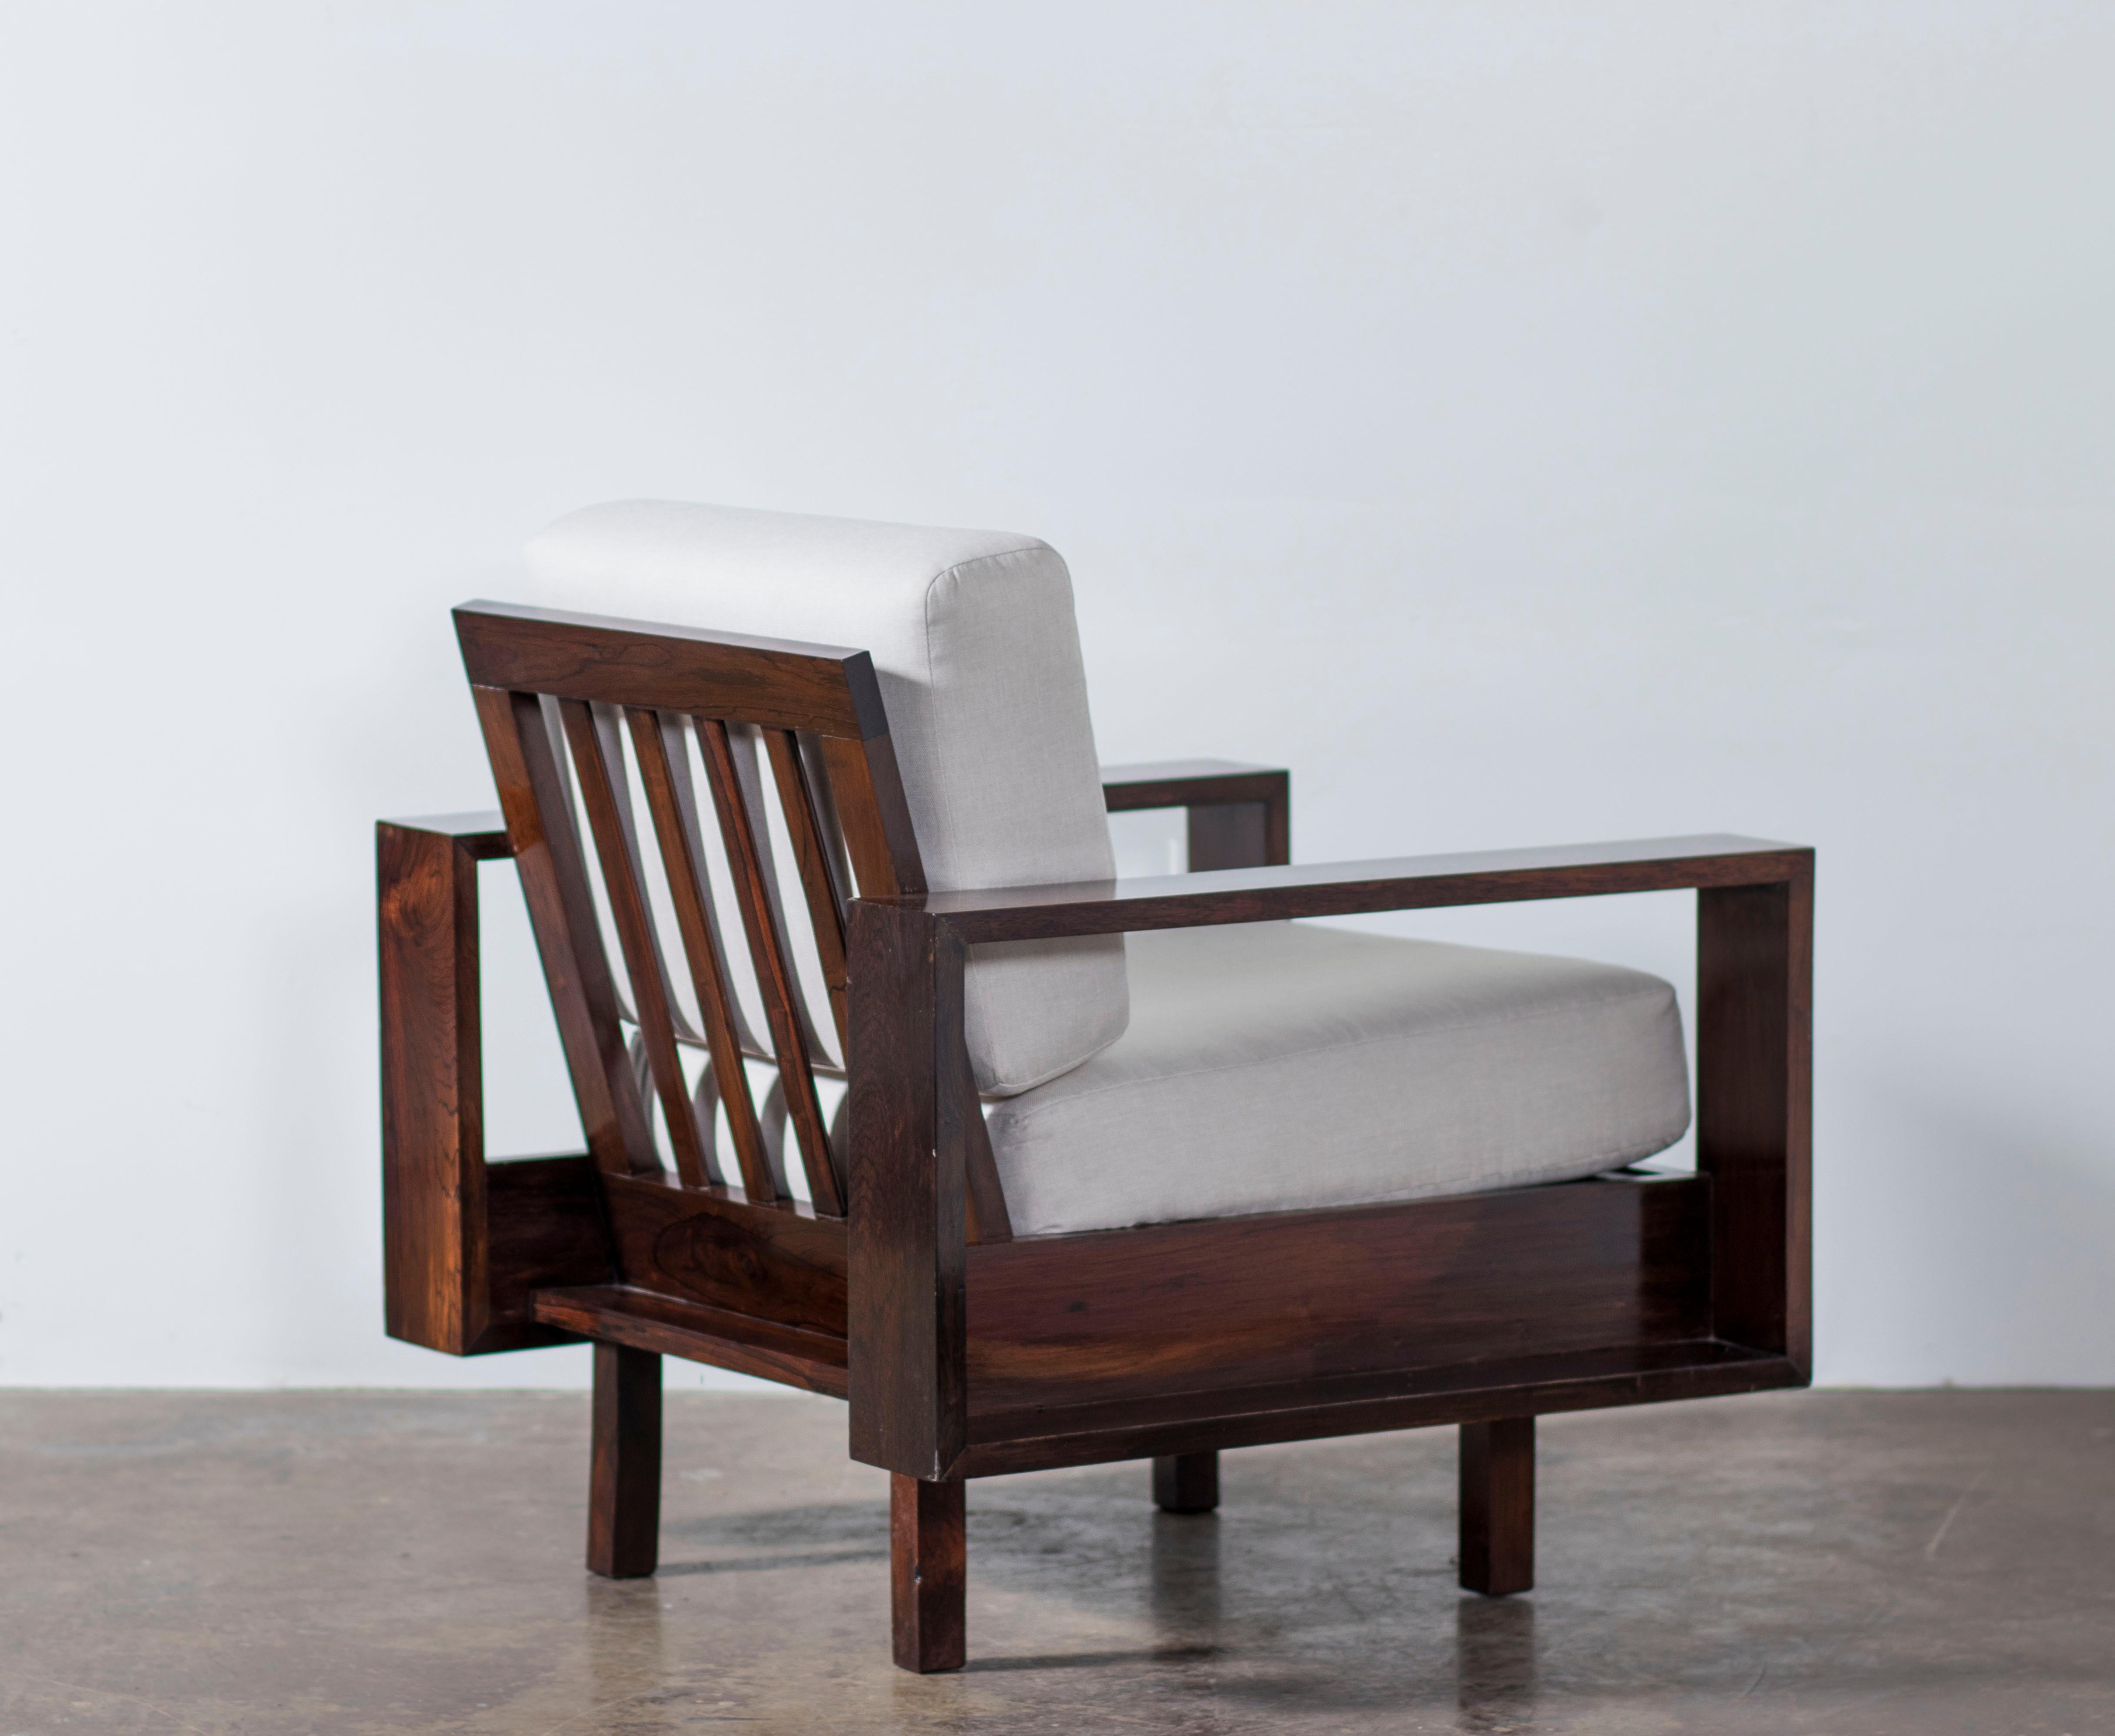 These armchairs are made of solid Brazilian Rosewood (Jacaranda) and recently reupholstered in off white linen by the experienced craftsmen in our team. The armrests have a rectangular design with a back of vertical slats and angular arms.

The